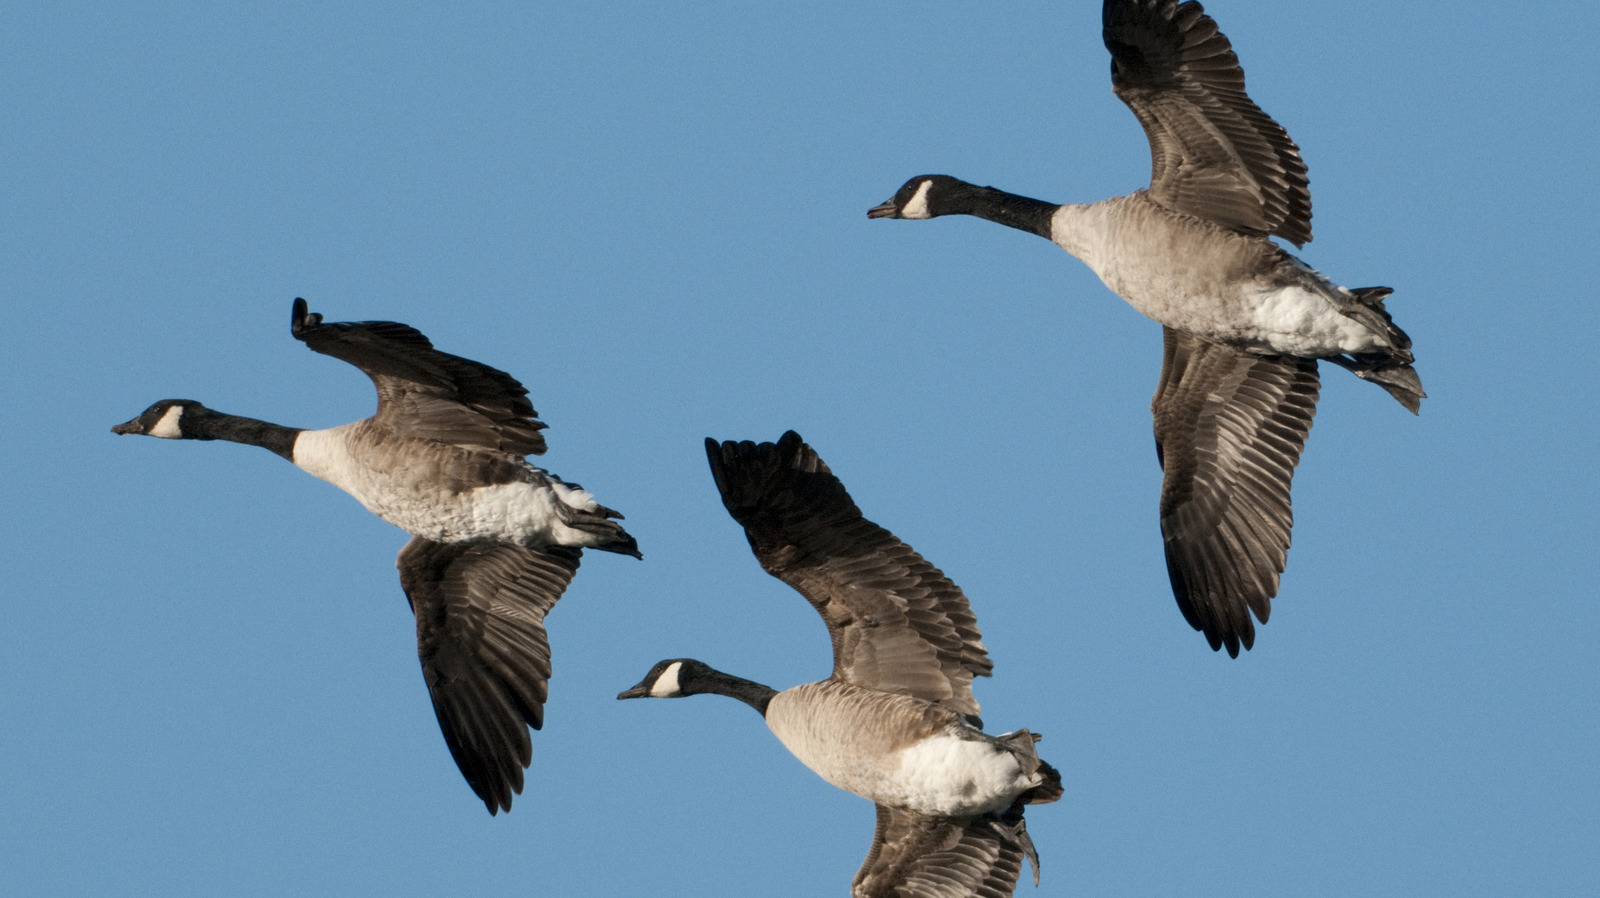 Why Do Geese Fly In A V Formation?